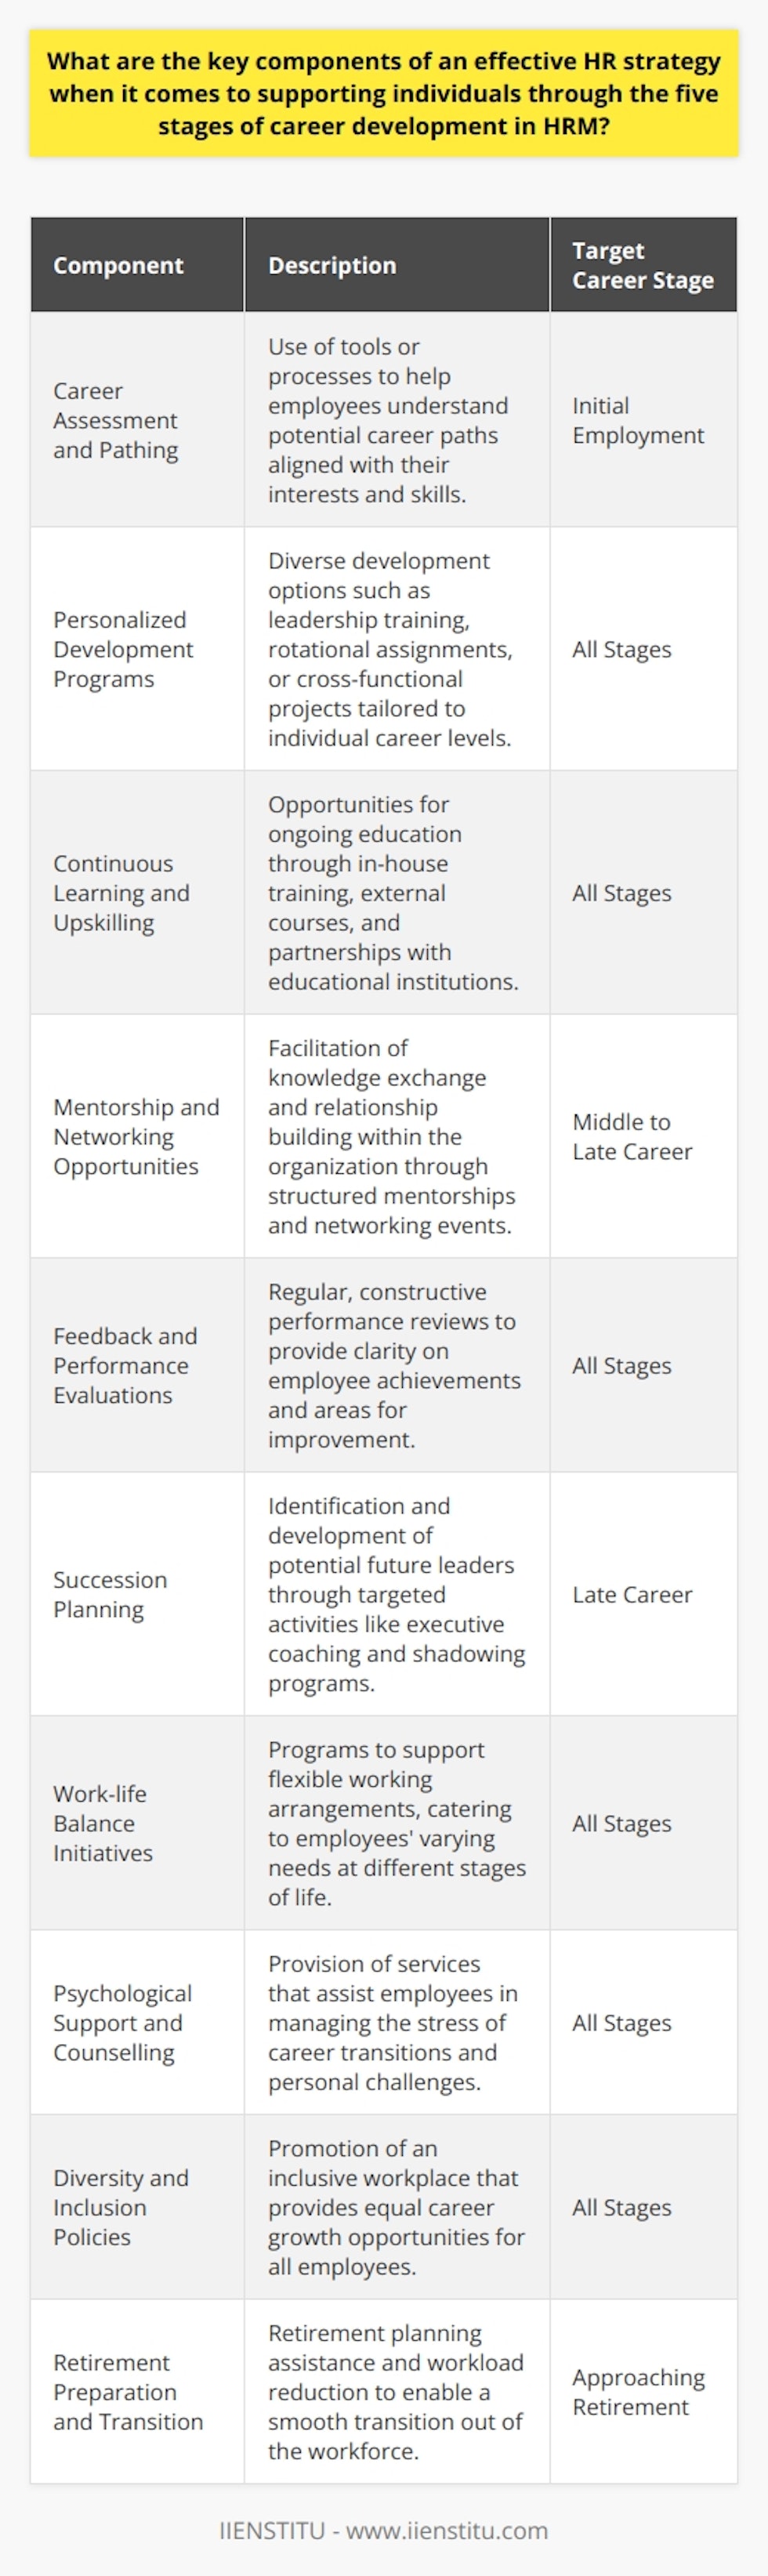 An effective HR strategy that supports individuals through the five stages of career development in HRM is multifaceted and requires a refined approach. The strategy should be holistic, covering all stages from initial employment to retirement. Here are the key components:1. **Career Assessment and Pathing**:   The strategy should include tools or processes for assessing employees' interests, values, and skills to help guide them into appropriate career paths. By understanding where they fit within the organization, employees can better focus their development efforts and HR can provide tailored career support.2. **Personalized Development Programs**:   This means having a diverse array of programs to suit the different career stages and needs of employees. For instance, early career employees may benefit from rotational assignments or graduate programs, while those in mid-career might require leadership training or cross-functional projects.3. **Continuous Learning and Upskilling**:   The strategy must commit to lifelong learning, providing various opportunities for upskilling and reskilling. This can happen through in-house training, partnerships with educational institutions like IIENSTITU, or subsidized external courses.4. **Mentorship and Networking Opportunities**:   Establishing mentoring partnerships and professional networking events can help employees gain insights from more experienced colleagues and build valuable relationships across the organization.5. **Feedback and Performance Evaluations**:   Frequent and constructive feedback is vital. An HR strategy should include regular, well-structured performance evaluations that help employees understand their strengths and areas for improvement.6. **Succession Planning**:   For higher career stages, the strategy should include a clear succession planning process that identifies and prepares future leaders through shadowing programs, executive coaching, or targeted leadership development activities.7. **Work-life Balance Initiatives**:   Understanding the changing needs of employees at different career stages and offering flexible work arrangements to address these can dramatically improve job satisfaction and retention.8. **Psychological Support and Counselling**:   Career transitions can be stressful. Providing support services, such as counselling or stress management workshops, can help employees cope with career stage transitions more easily.9. **Diversity and Inclusion Policies**:   Ensuring all employees have equal opportunities for career advancement regardless of their background, gender, or age is essential. A successful HR strategy promotes a workplace where diverse talent can thrive at each stage of their careers.10. **Retirement Preparation and Transition**:    For those nearing the end of their careers, HR can offer retirement planning seminars and gradually reduce workloads to help them smoothly transition out of the workforce.In summary, an effective HR strategy for career development must facilitate the growth trajectory of employees in a personalized, flexible, and empathetic manner. From structured learning pathways to supportive mentoring and a proactive succession plan, these strategies can not only enhance individual careers but also foster organizational growth and stability.